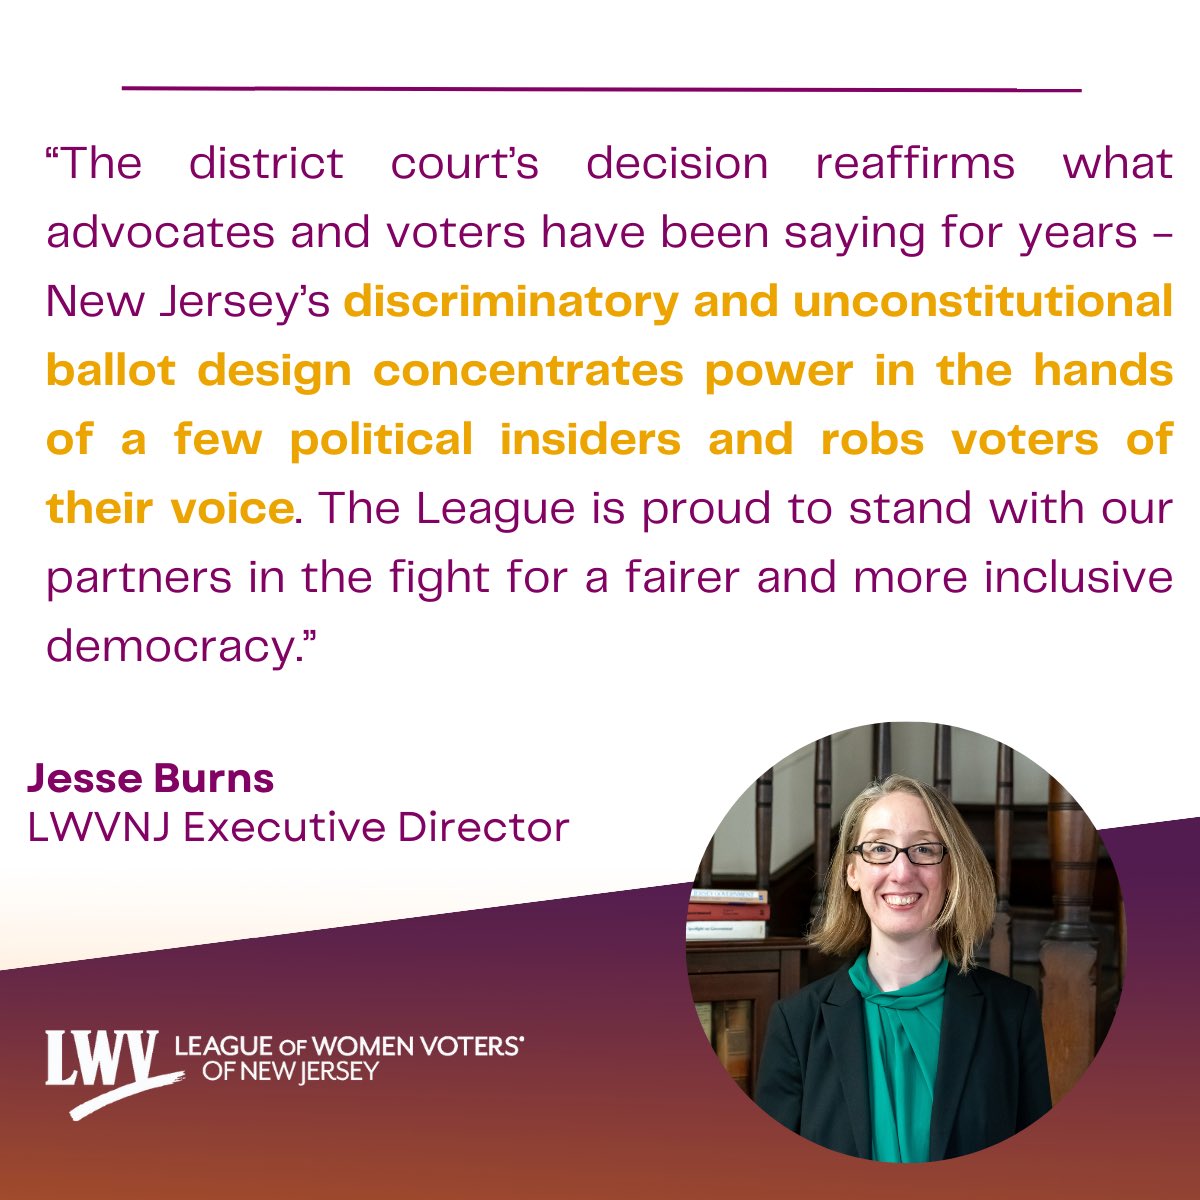 Tomorrow (4/12) the Third Circuit will hear oral arguments. LWVNJ is proud to join with our partners, @NJ_ISJ @CampaignLegal @LWV @SandSJ_NJ @NJAIJ @NJPolicy @aapinewjersey @aaldef @AAAJ_AAJC to file another amicus brief to abolish the county line. bit.ly/line_appeal